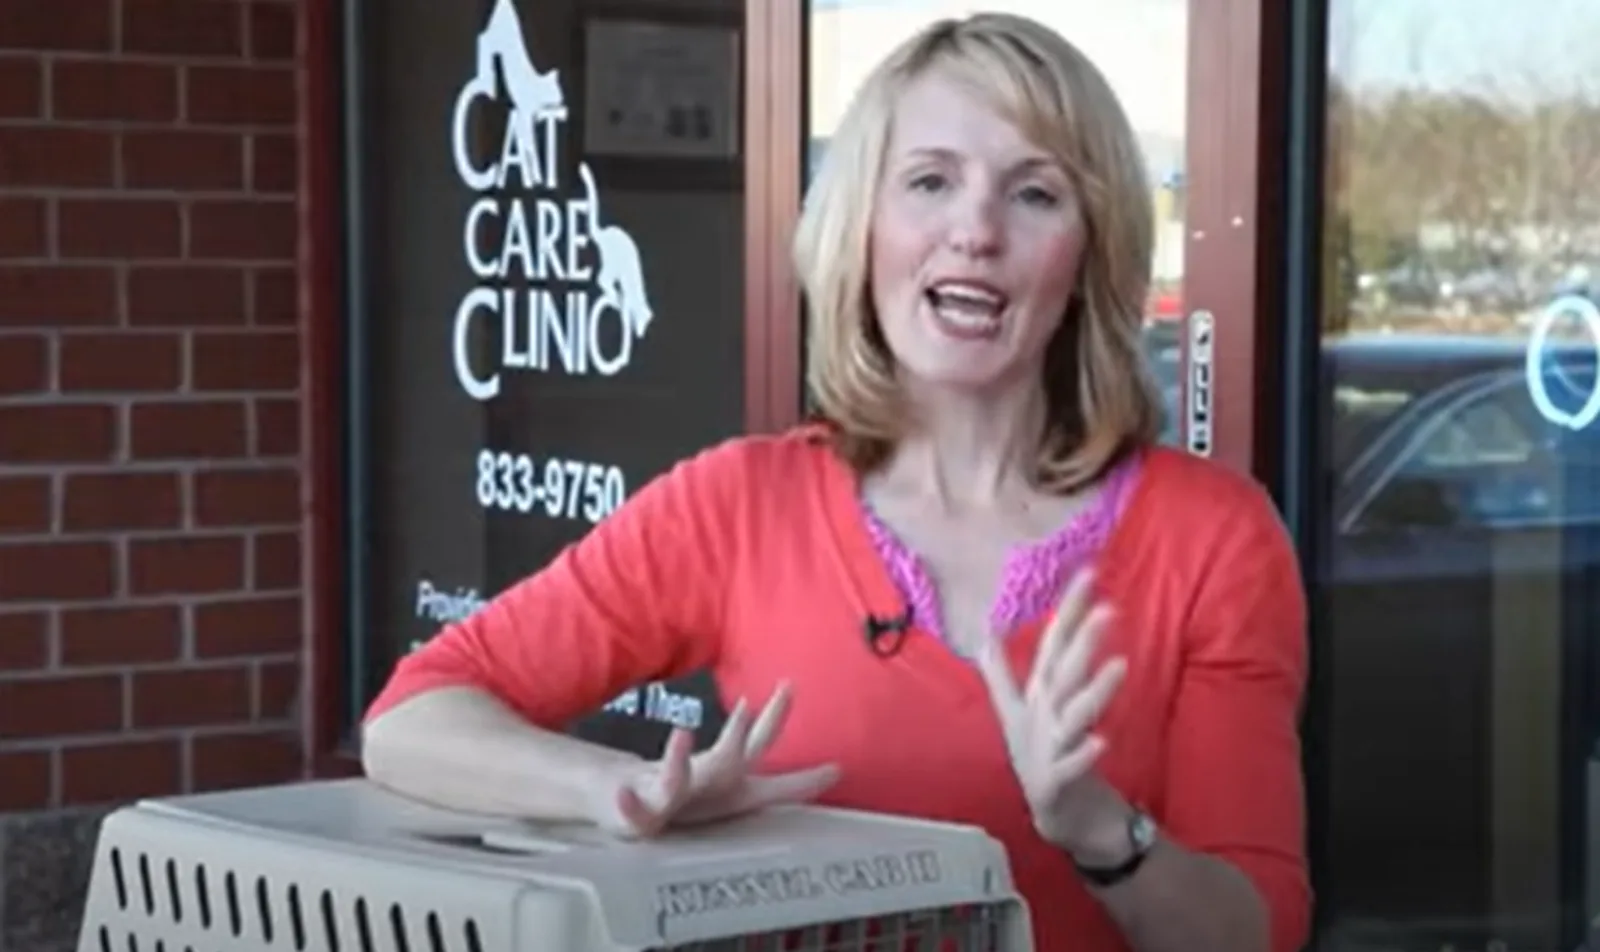 Woman in red shirt standing with a cat carrier